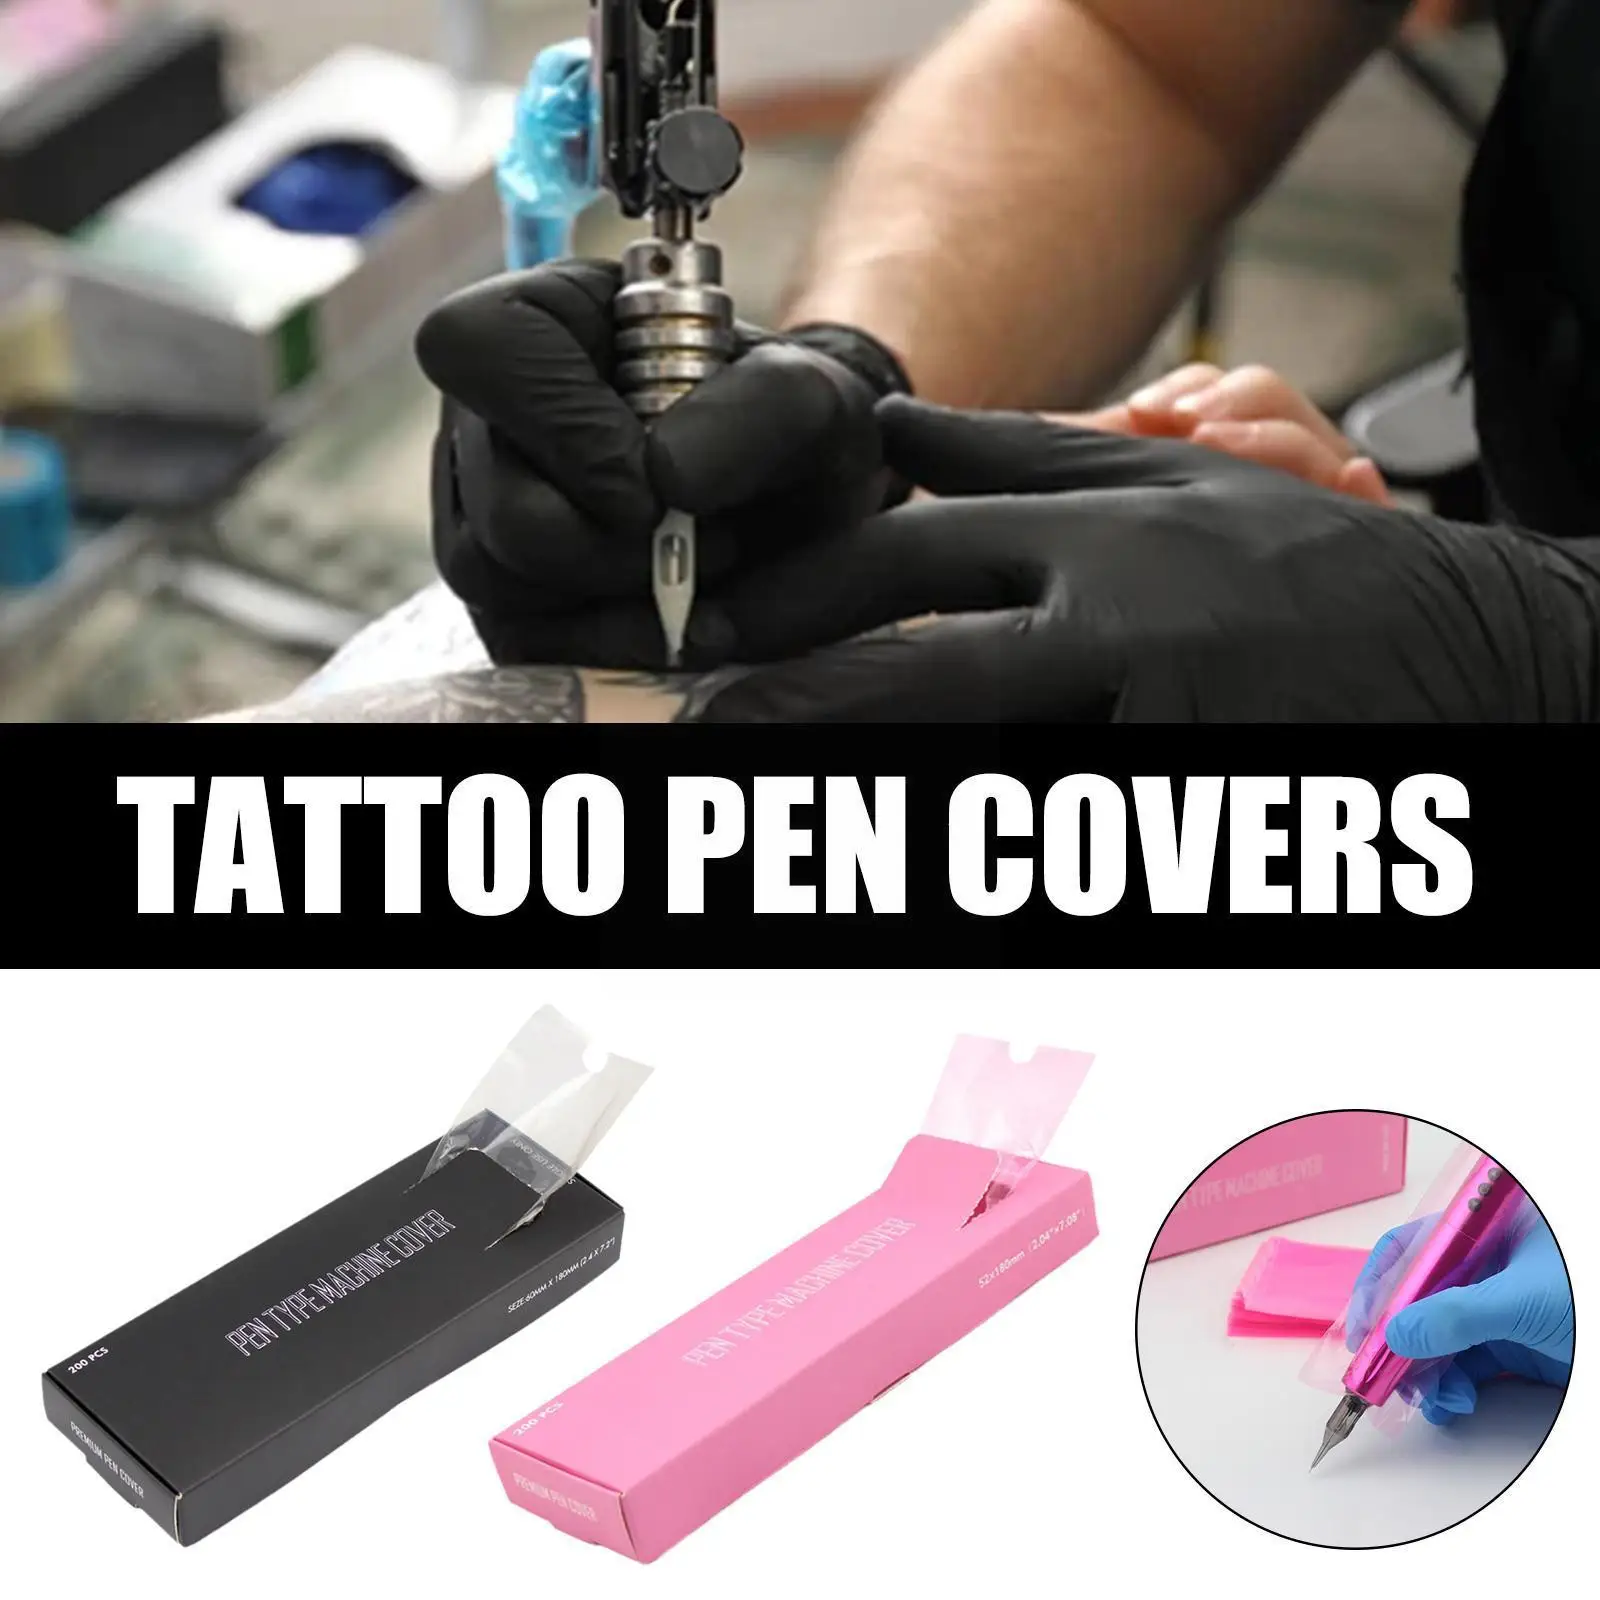 

Tattoo Pen Copper-Energy 200pcs Tattoo Pen Machine Disposable Pen Cartridge Tattoo Sleeves Bags Type Bags Pink Covers Machi H3A1